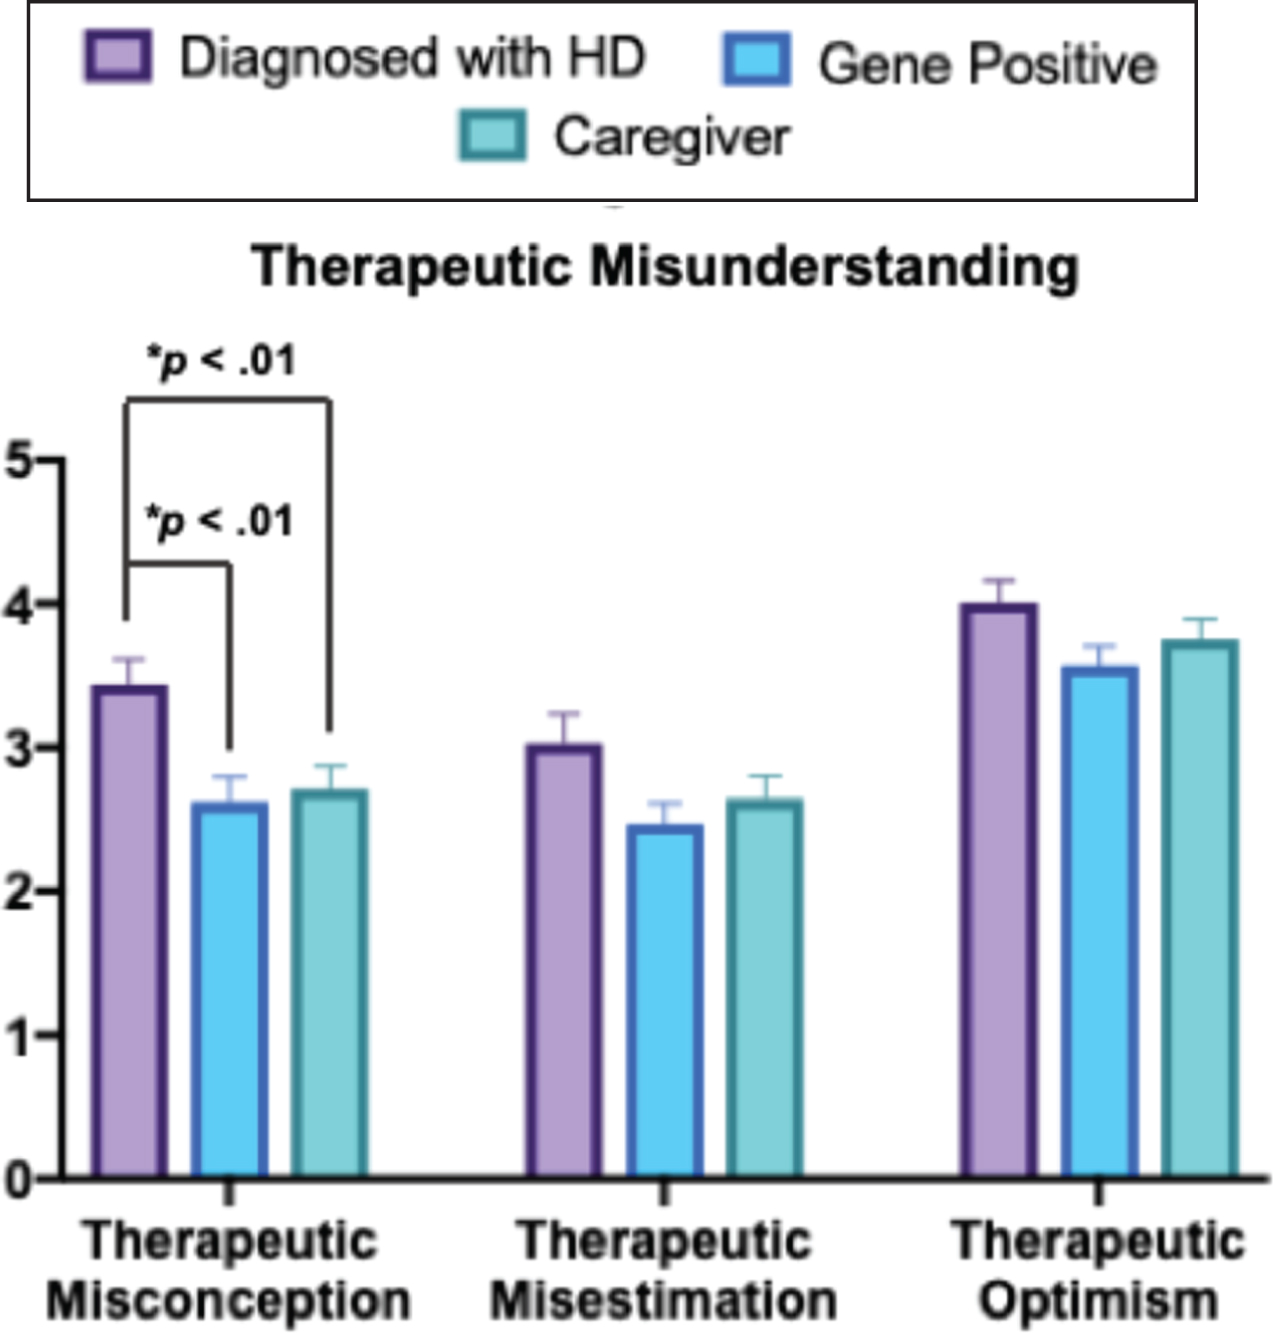 Clinical trial understanding in the HD community. The TMU scale included 20 statements organize into three subscales: Therapeutic Misconception, Therapeutic Misestimation, and Therapeutic Optimism [15]. Respondents were asked to rate their agreement with each statement on a five-point Likert scale, ranging from 1 = Strongly Disagree to 5 = Strongly Agree. Subscale scores were calculated via the means of each statement within the specific subscale. Comparisons between groups were calculated using one-way ANOVA [F(2,70) = 6.584, p = 0.002] with the Games-Howell post-test. The mean score for individuals with HD (M = 3.44, SD = 0.77) was significantly greater than both gene positive respondents (M = 2.62, SD = 0.78, p < 0.01) and caregivers (M = 2.71, SD = 0.87, p < 0.01) The graph shows average subscale scores±standard error of the mean (SEM). Asterisks (*) indicate a significant difference compared to the other two groups.